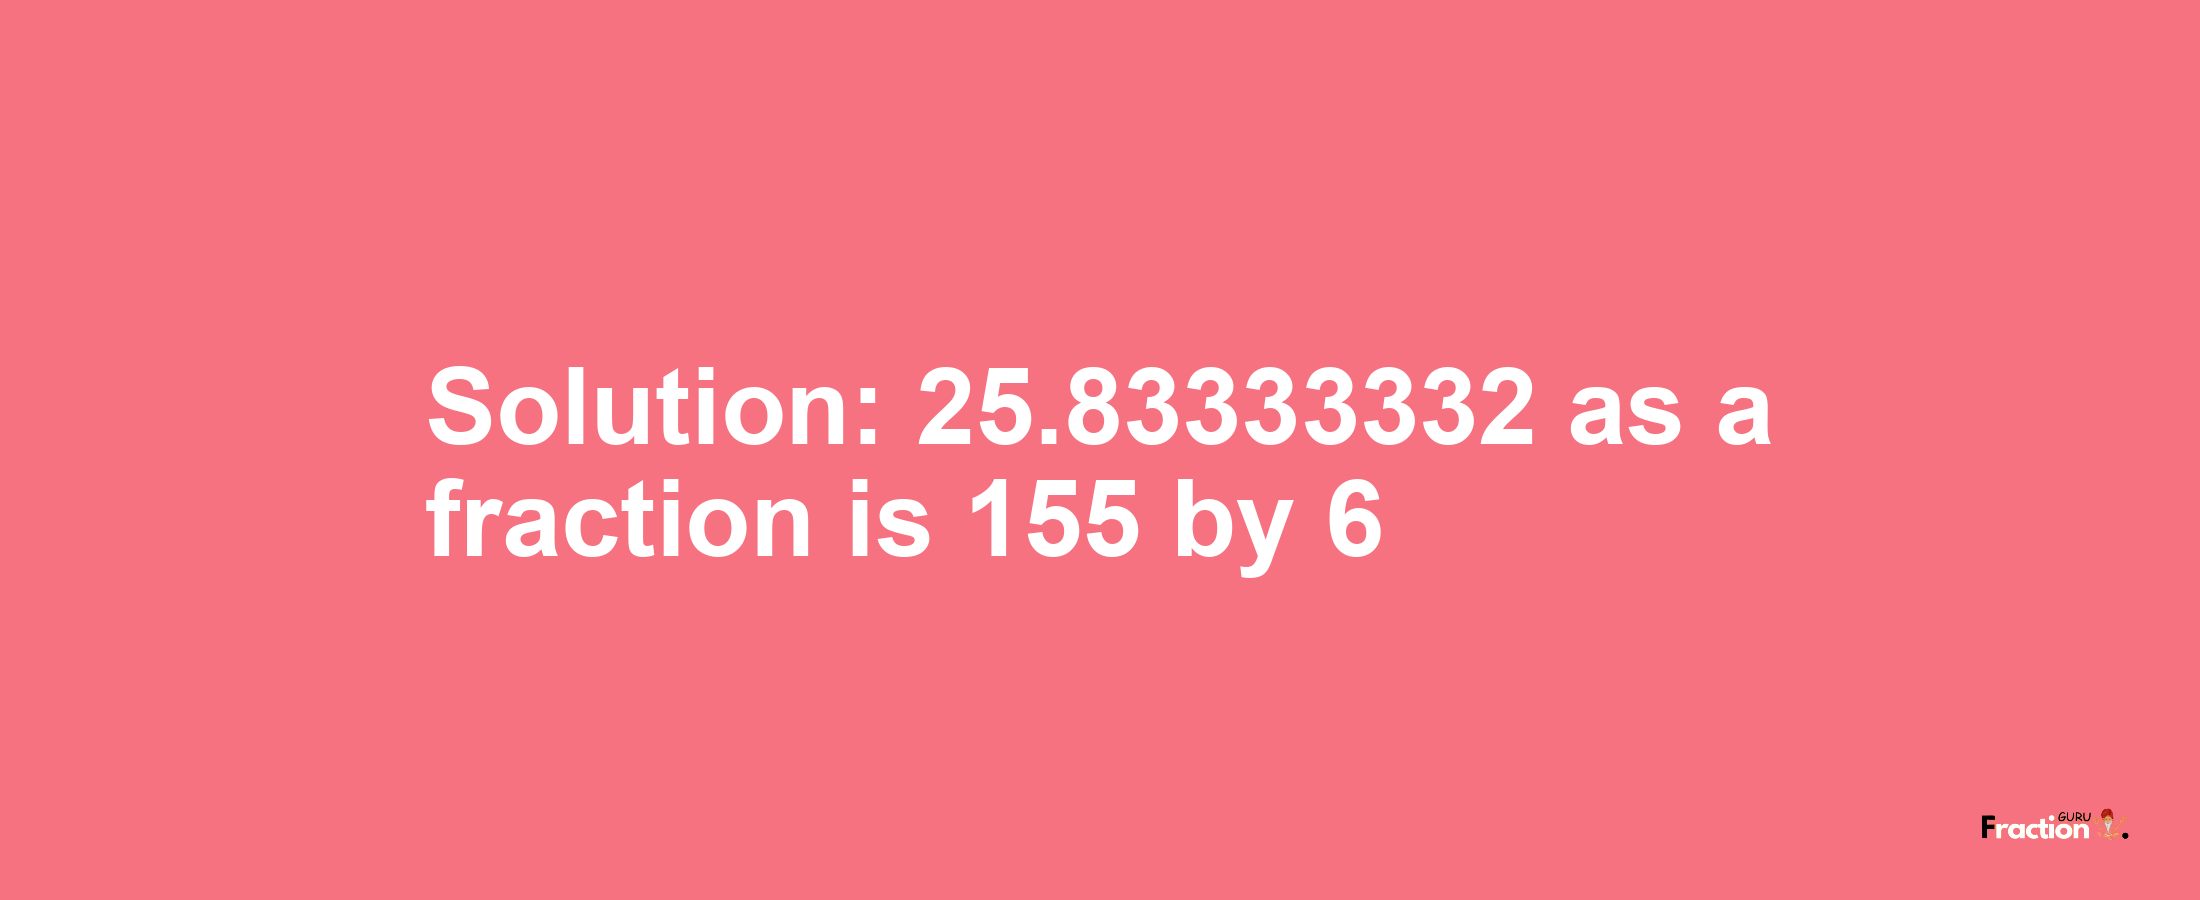 Solution:25.83333332 as a fraction is 155/6